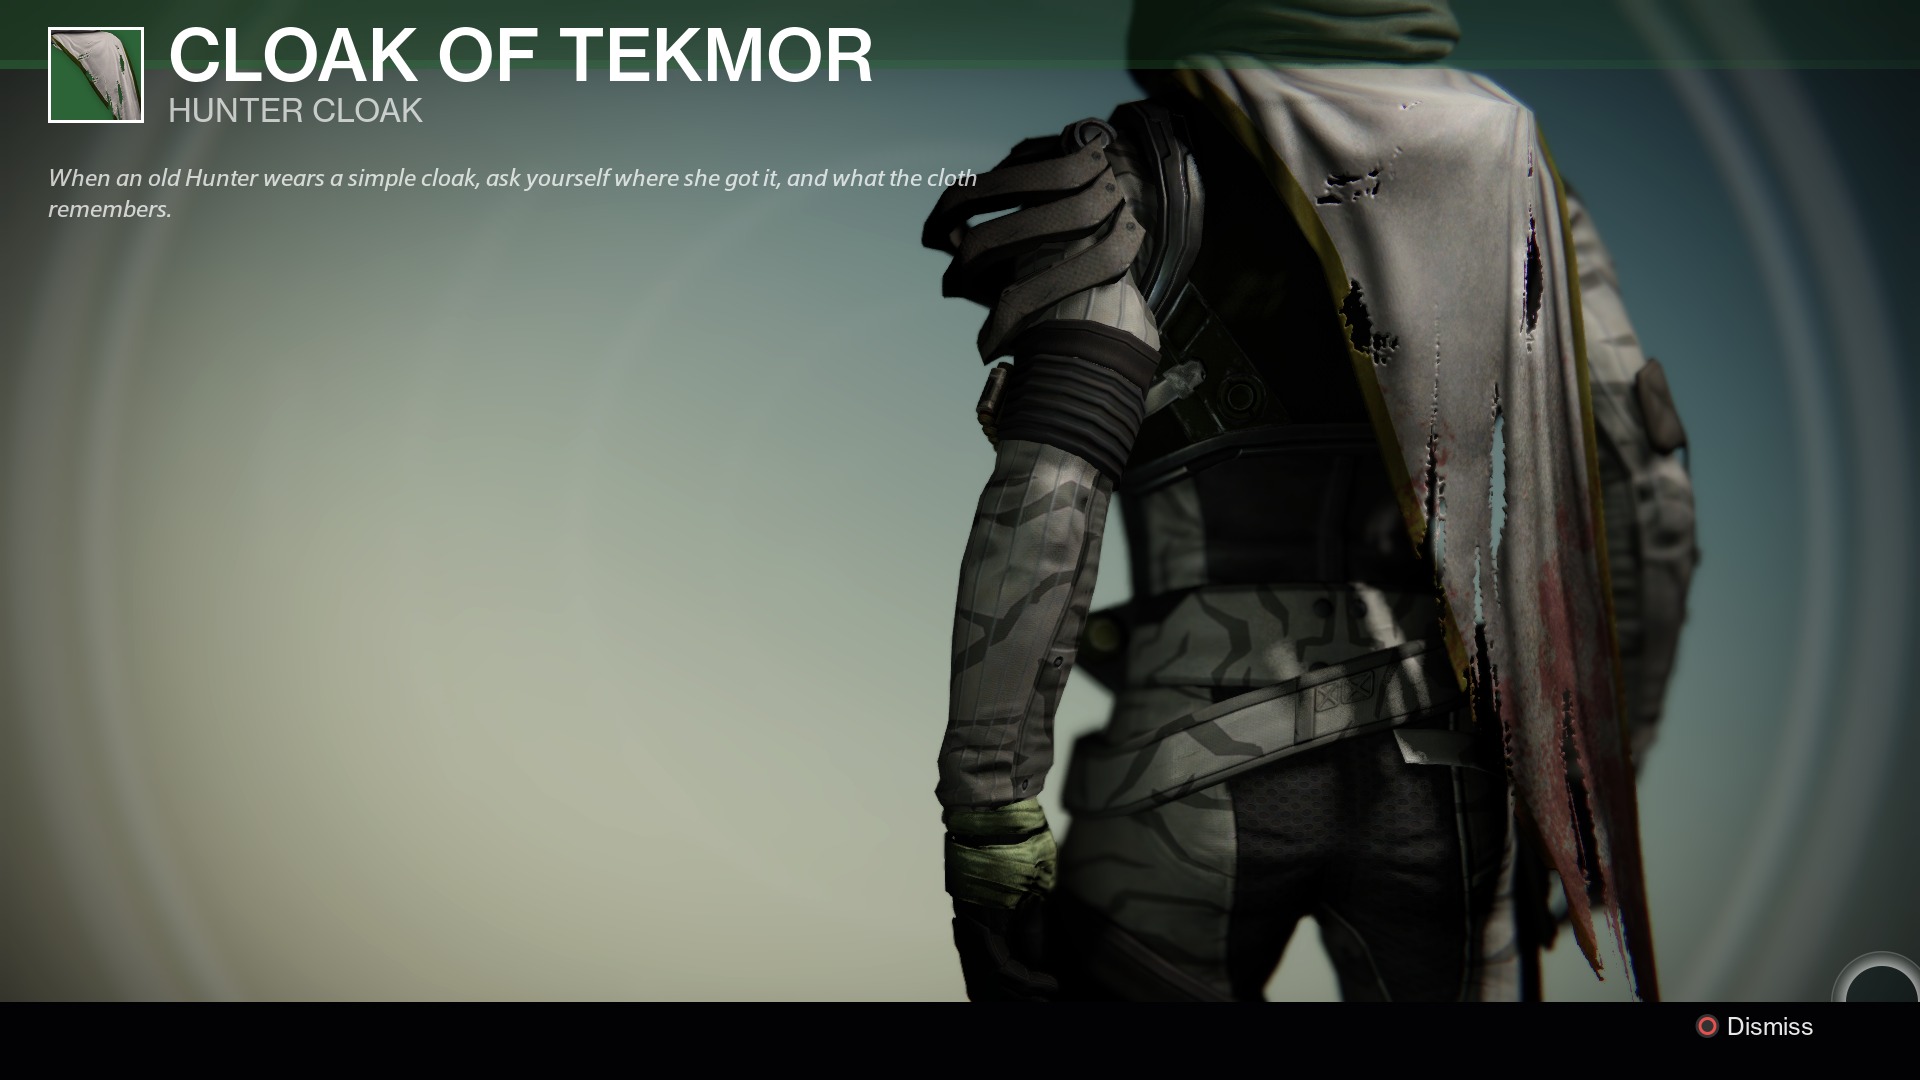 Image is about Destiny Hunter Cloaks.